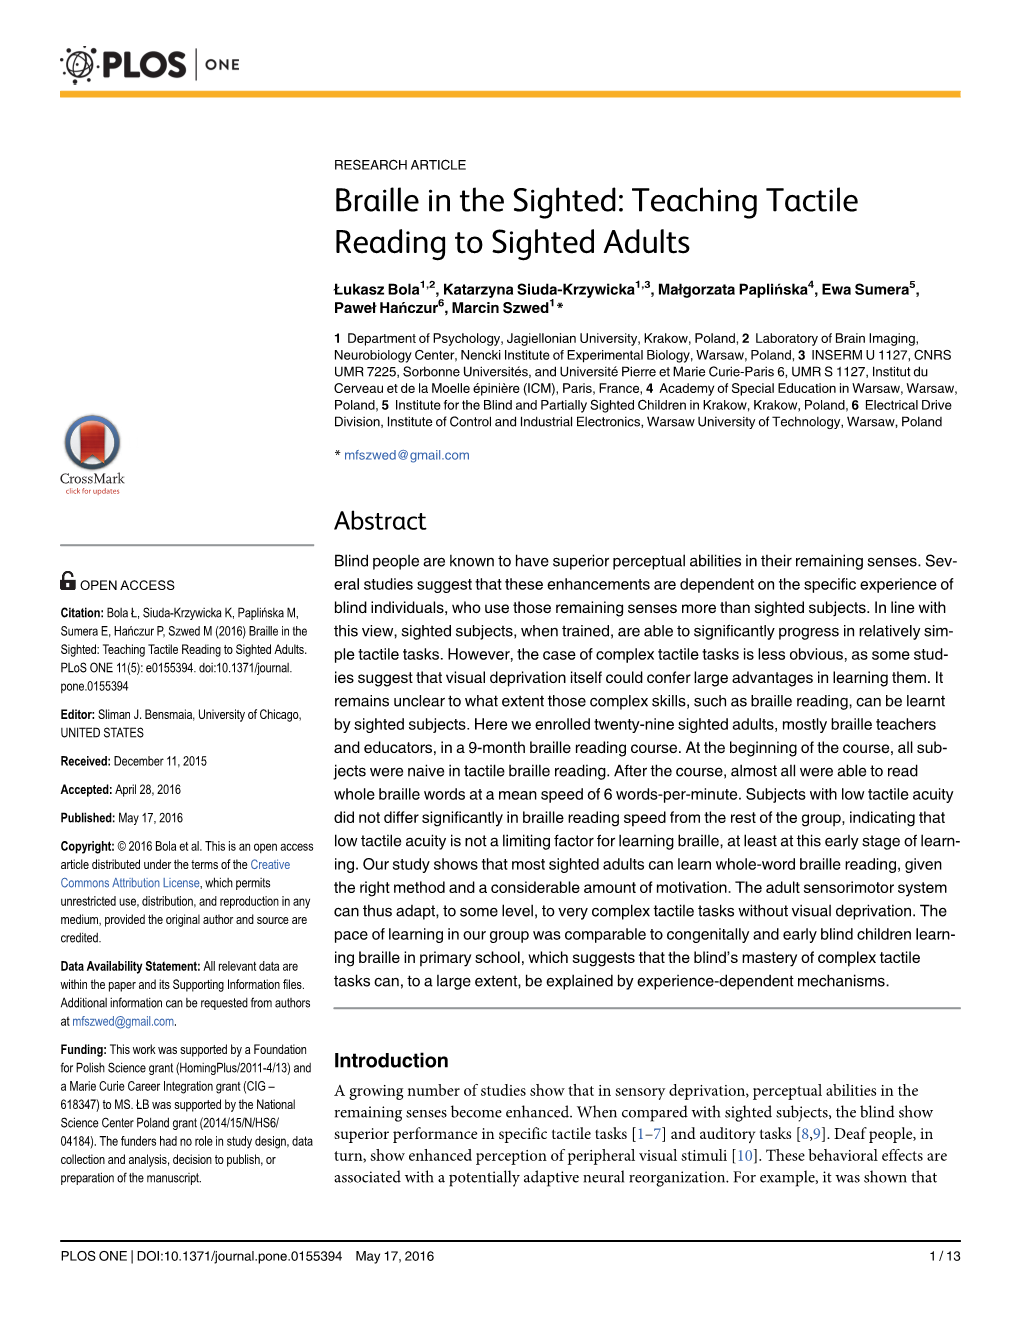 Braille in the Sighted: Teaching Tactile Reading to Sighted Adults